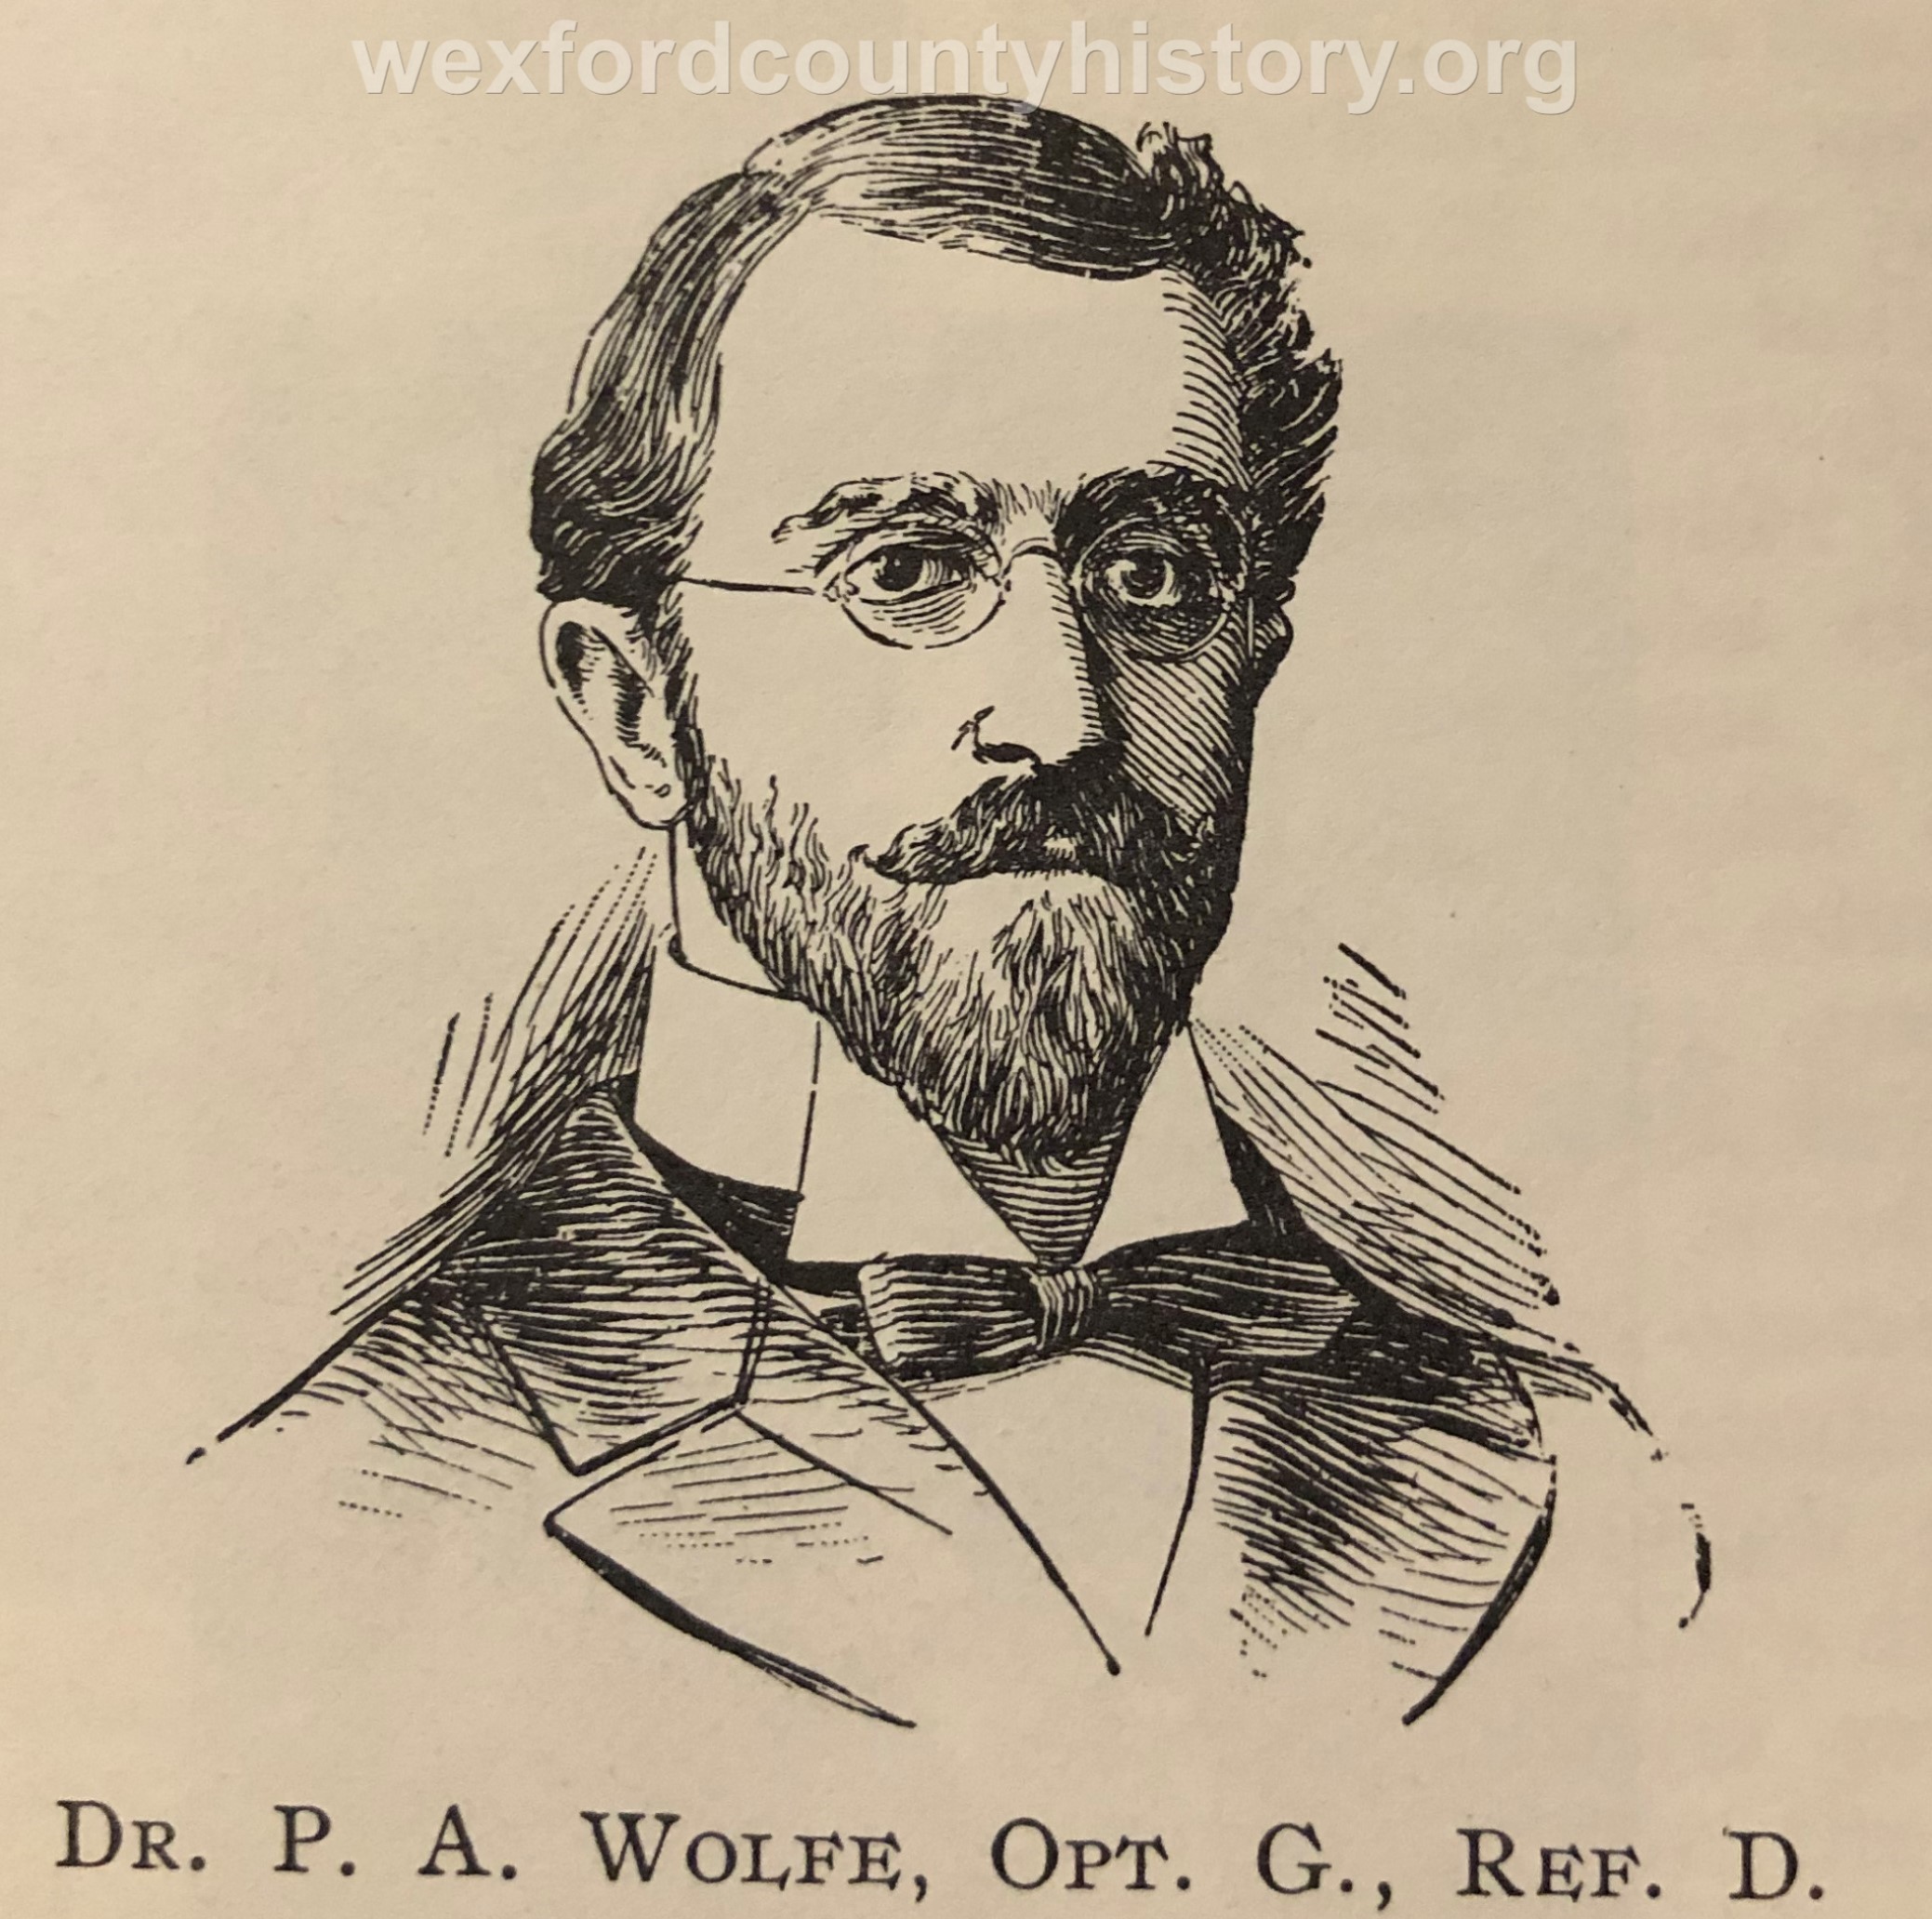 Dr. Wolfe